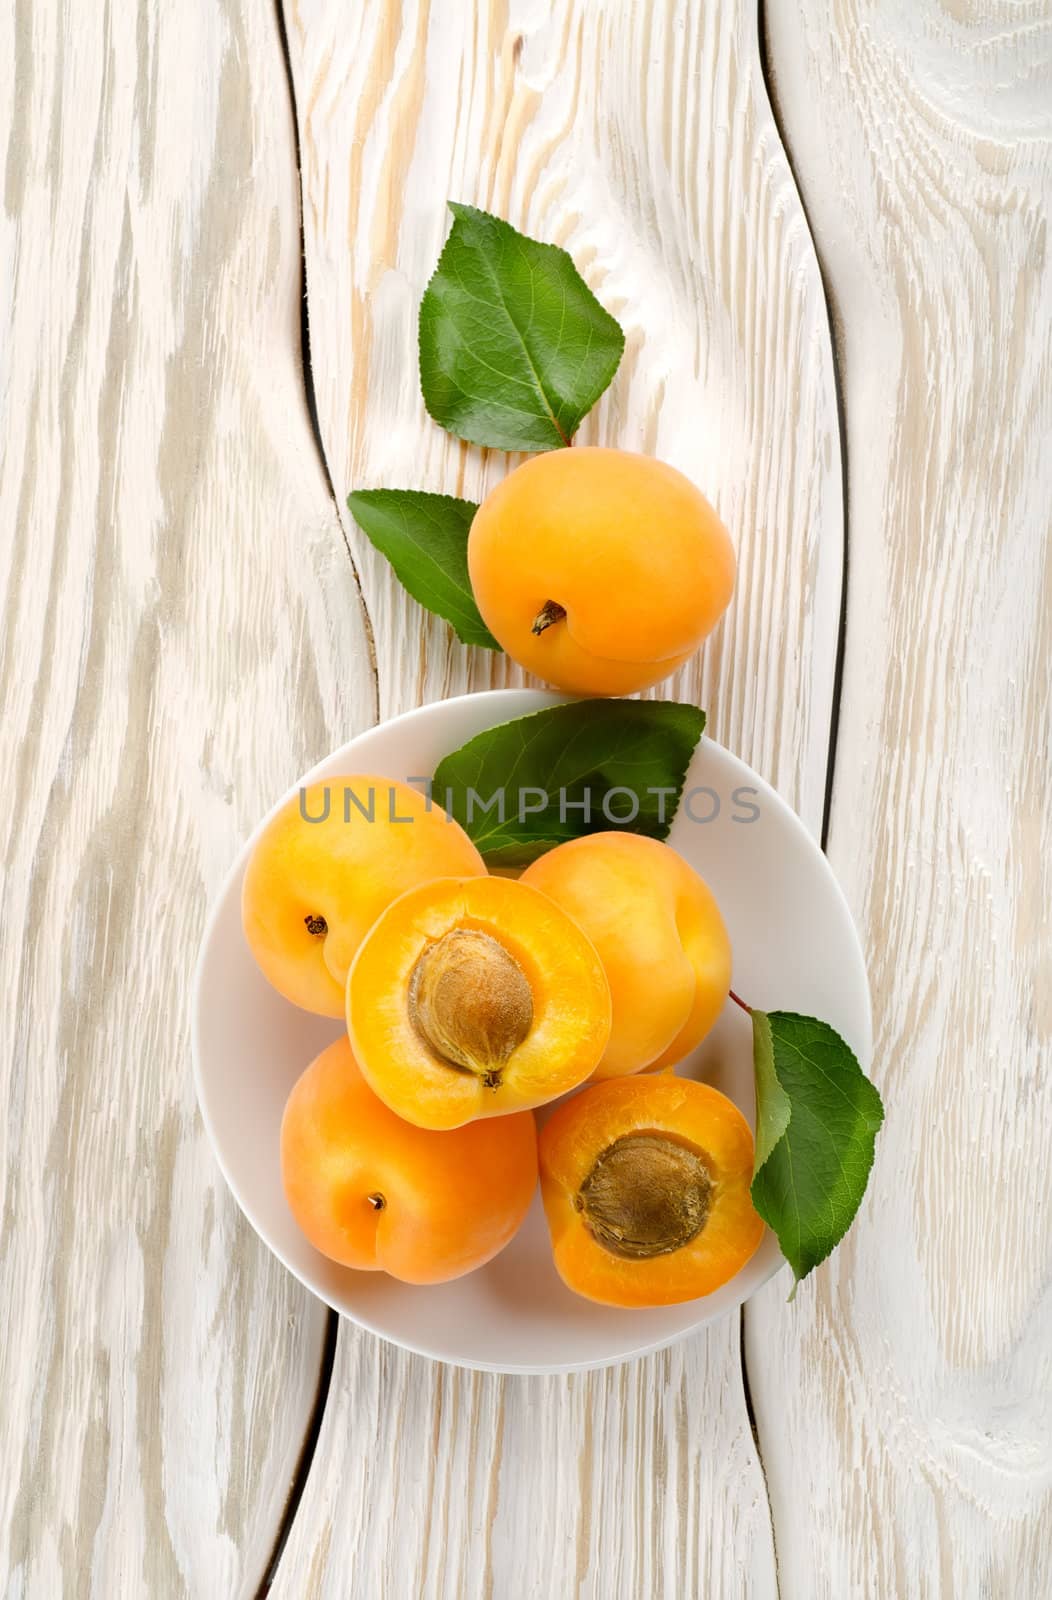 Apricots on the plate by Givaga